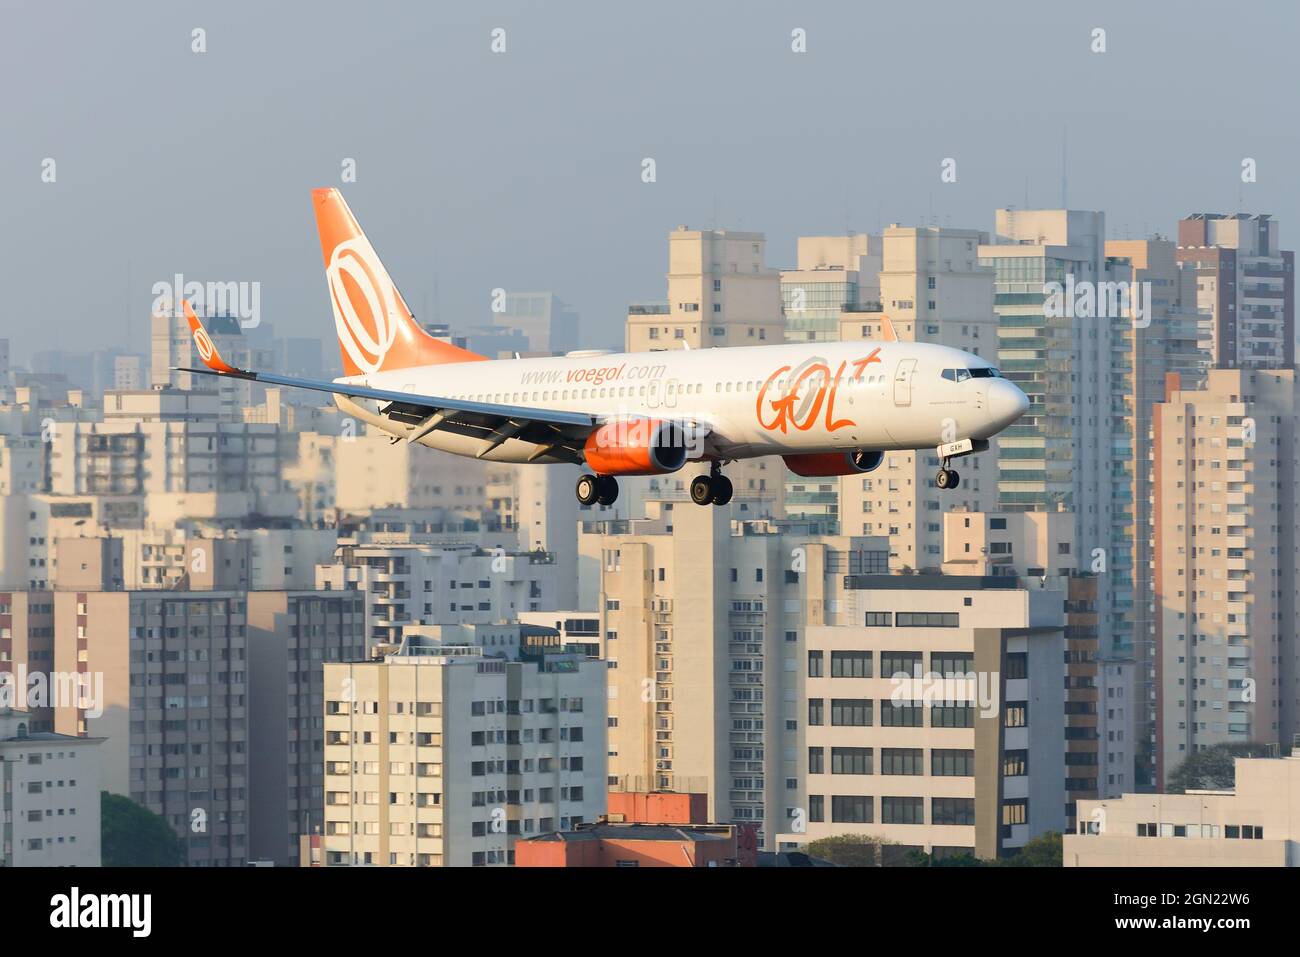 Gol Airlines Boeing 737 on final approach to Congonhas Airport in Sao Paulo, Brazil. Brazilian airline landing with Sao Paulo City skyline behind. Stock Photo